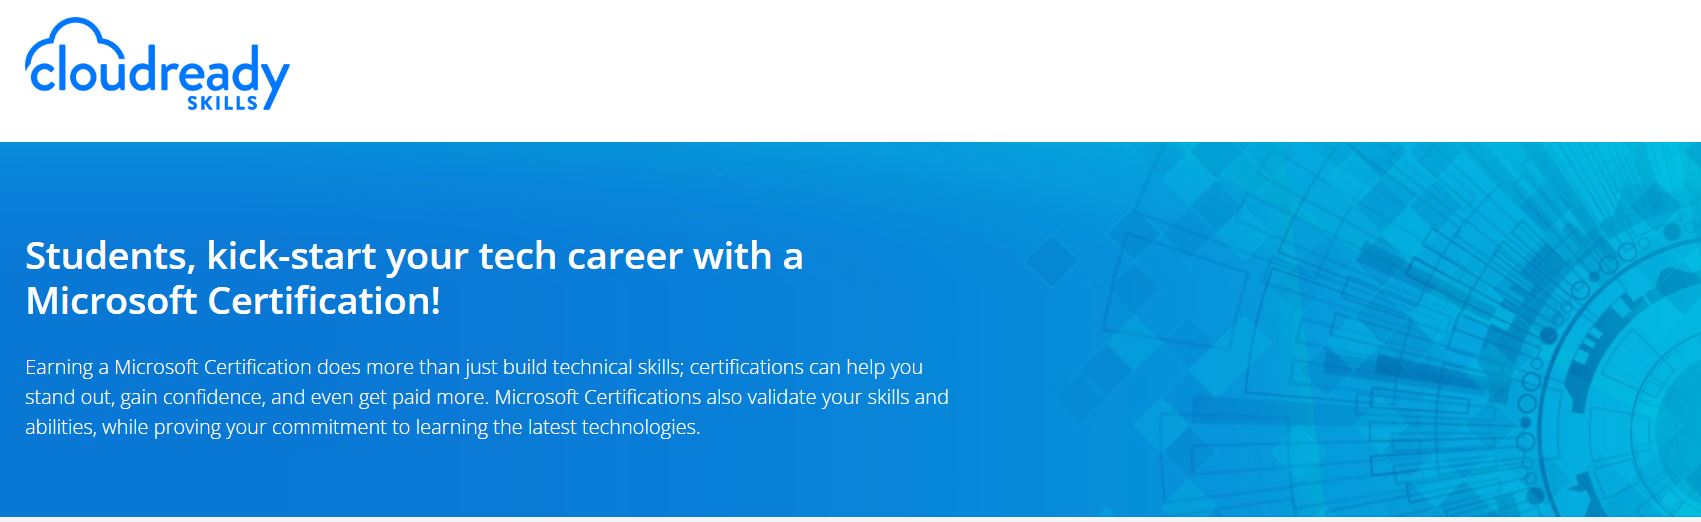 Microsoft Certified Courses